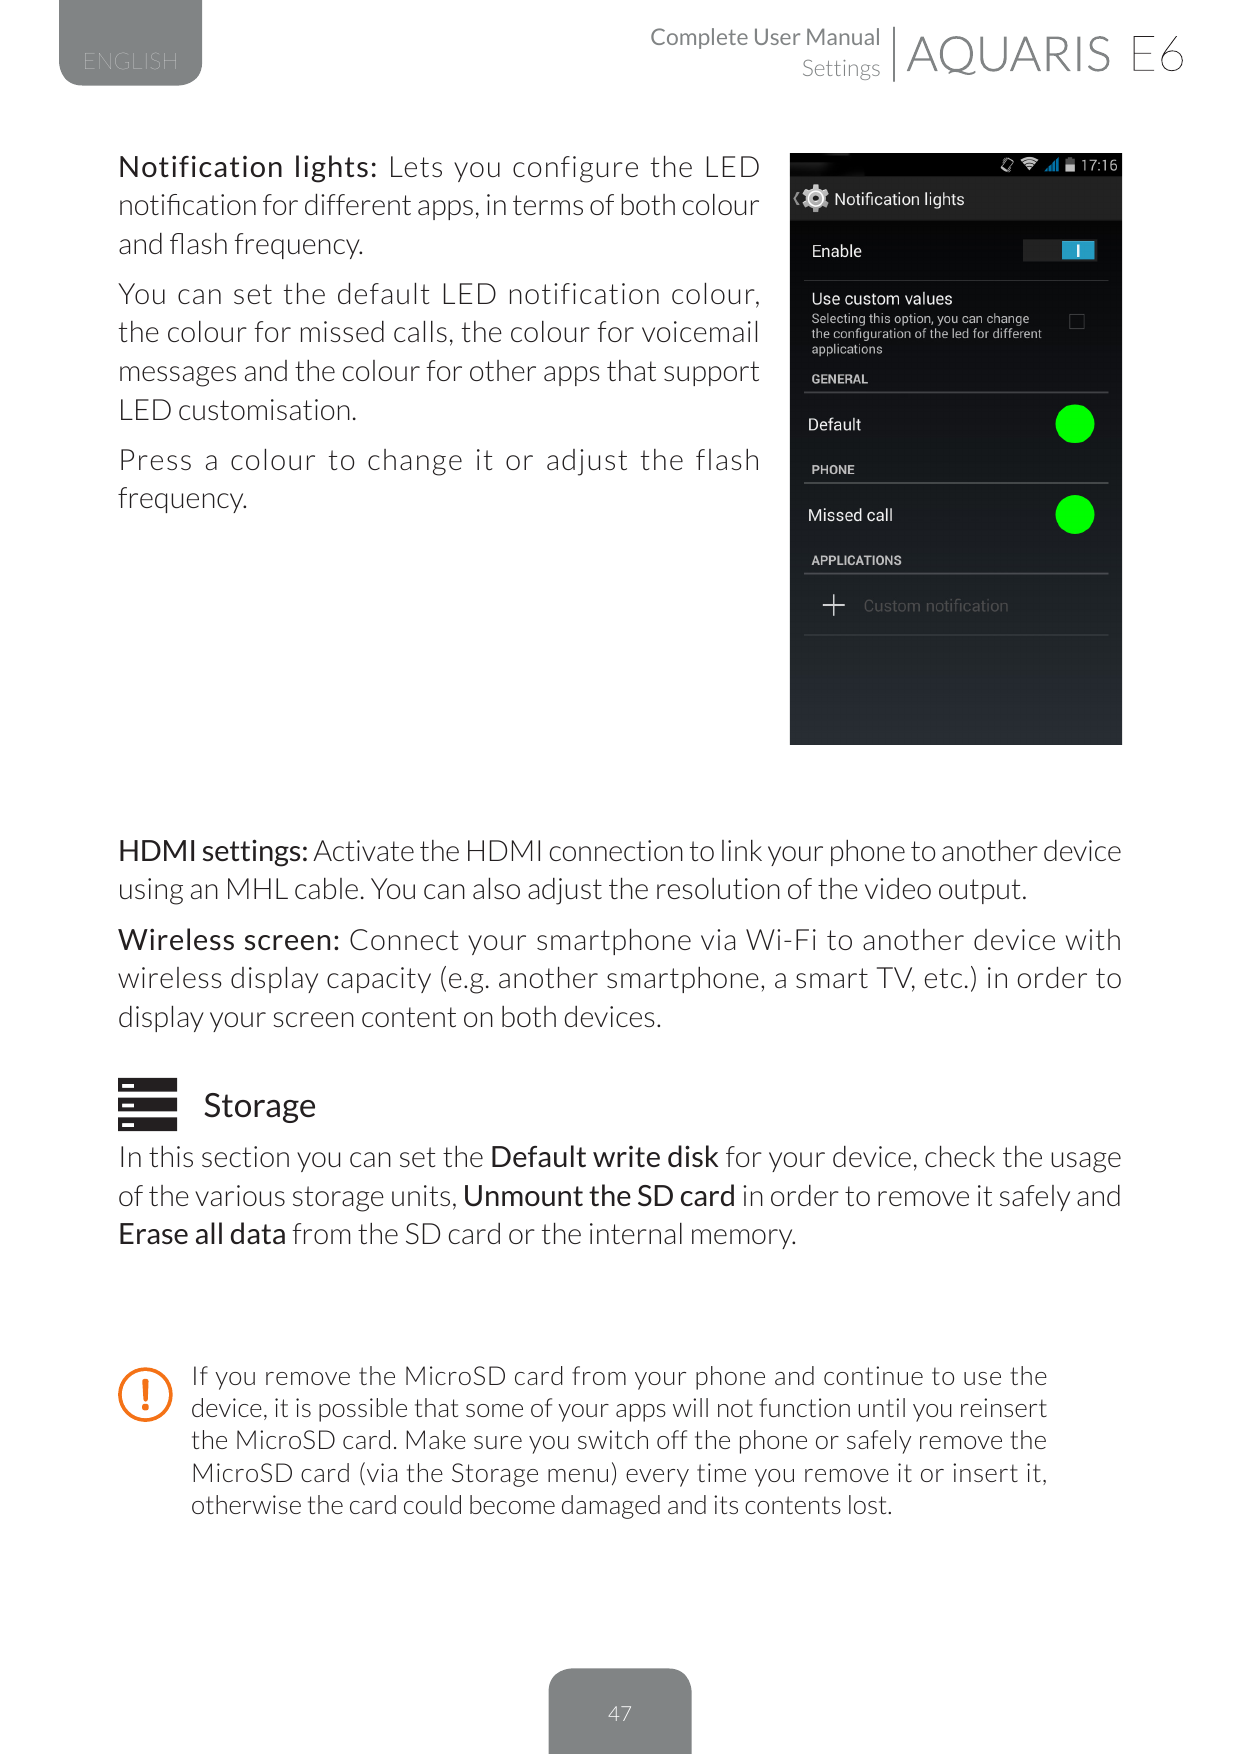 Complete User ManualSettingsENGLISHNotification lights: Lets you configure the LEDnotification for different apps, in terms of b